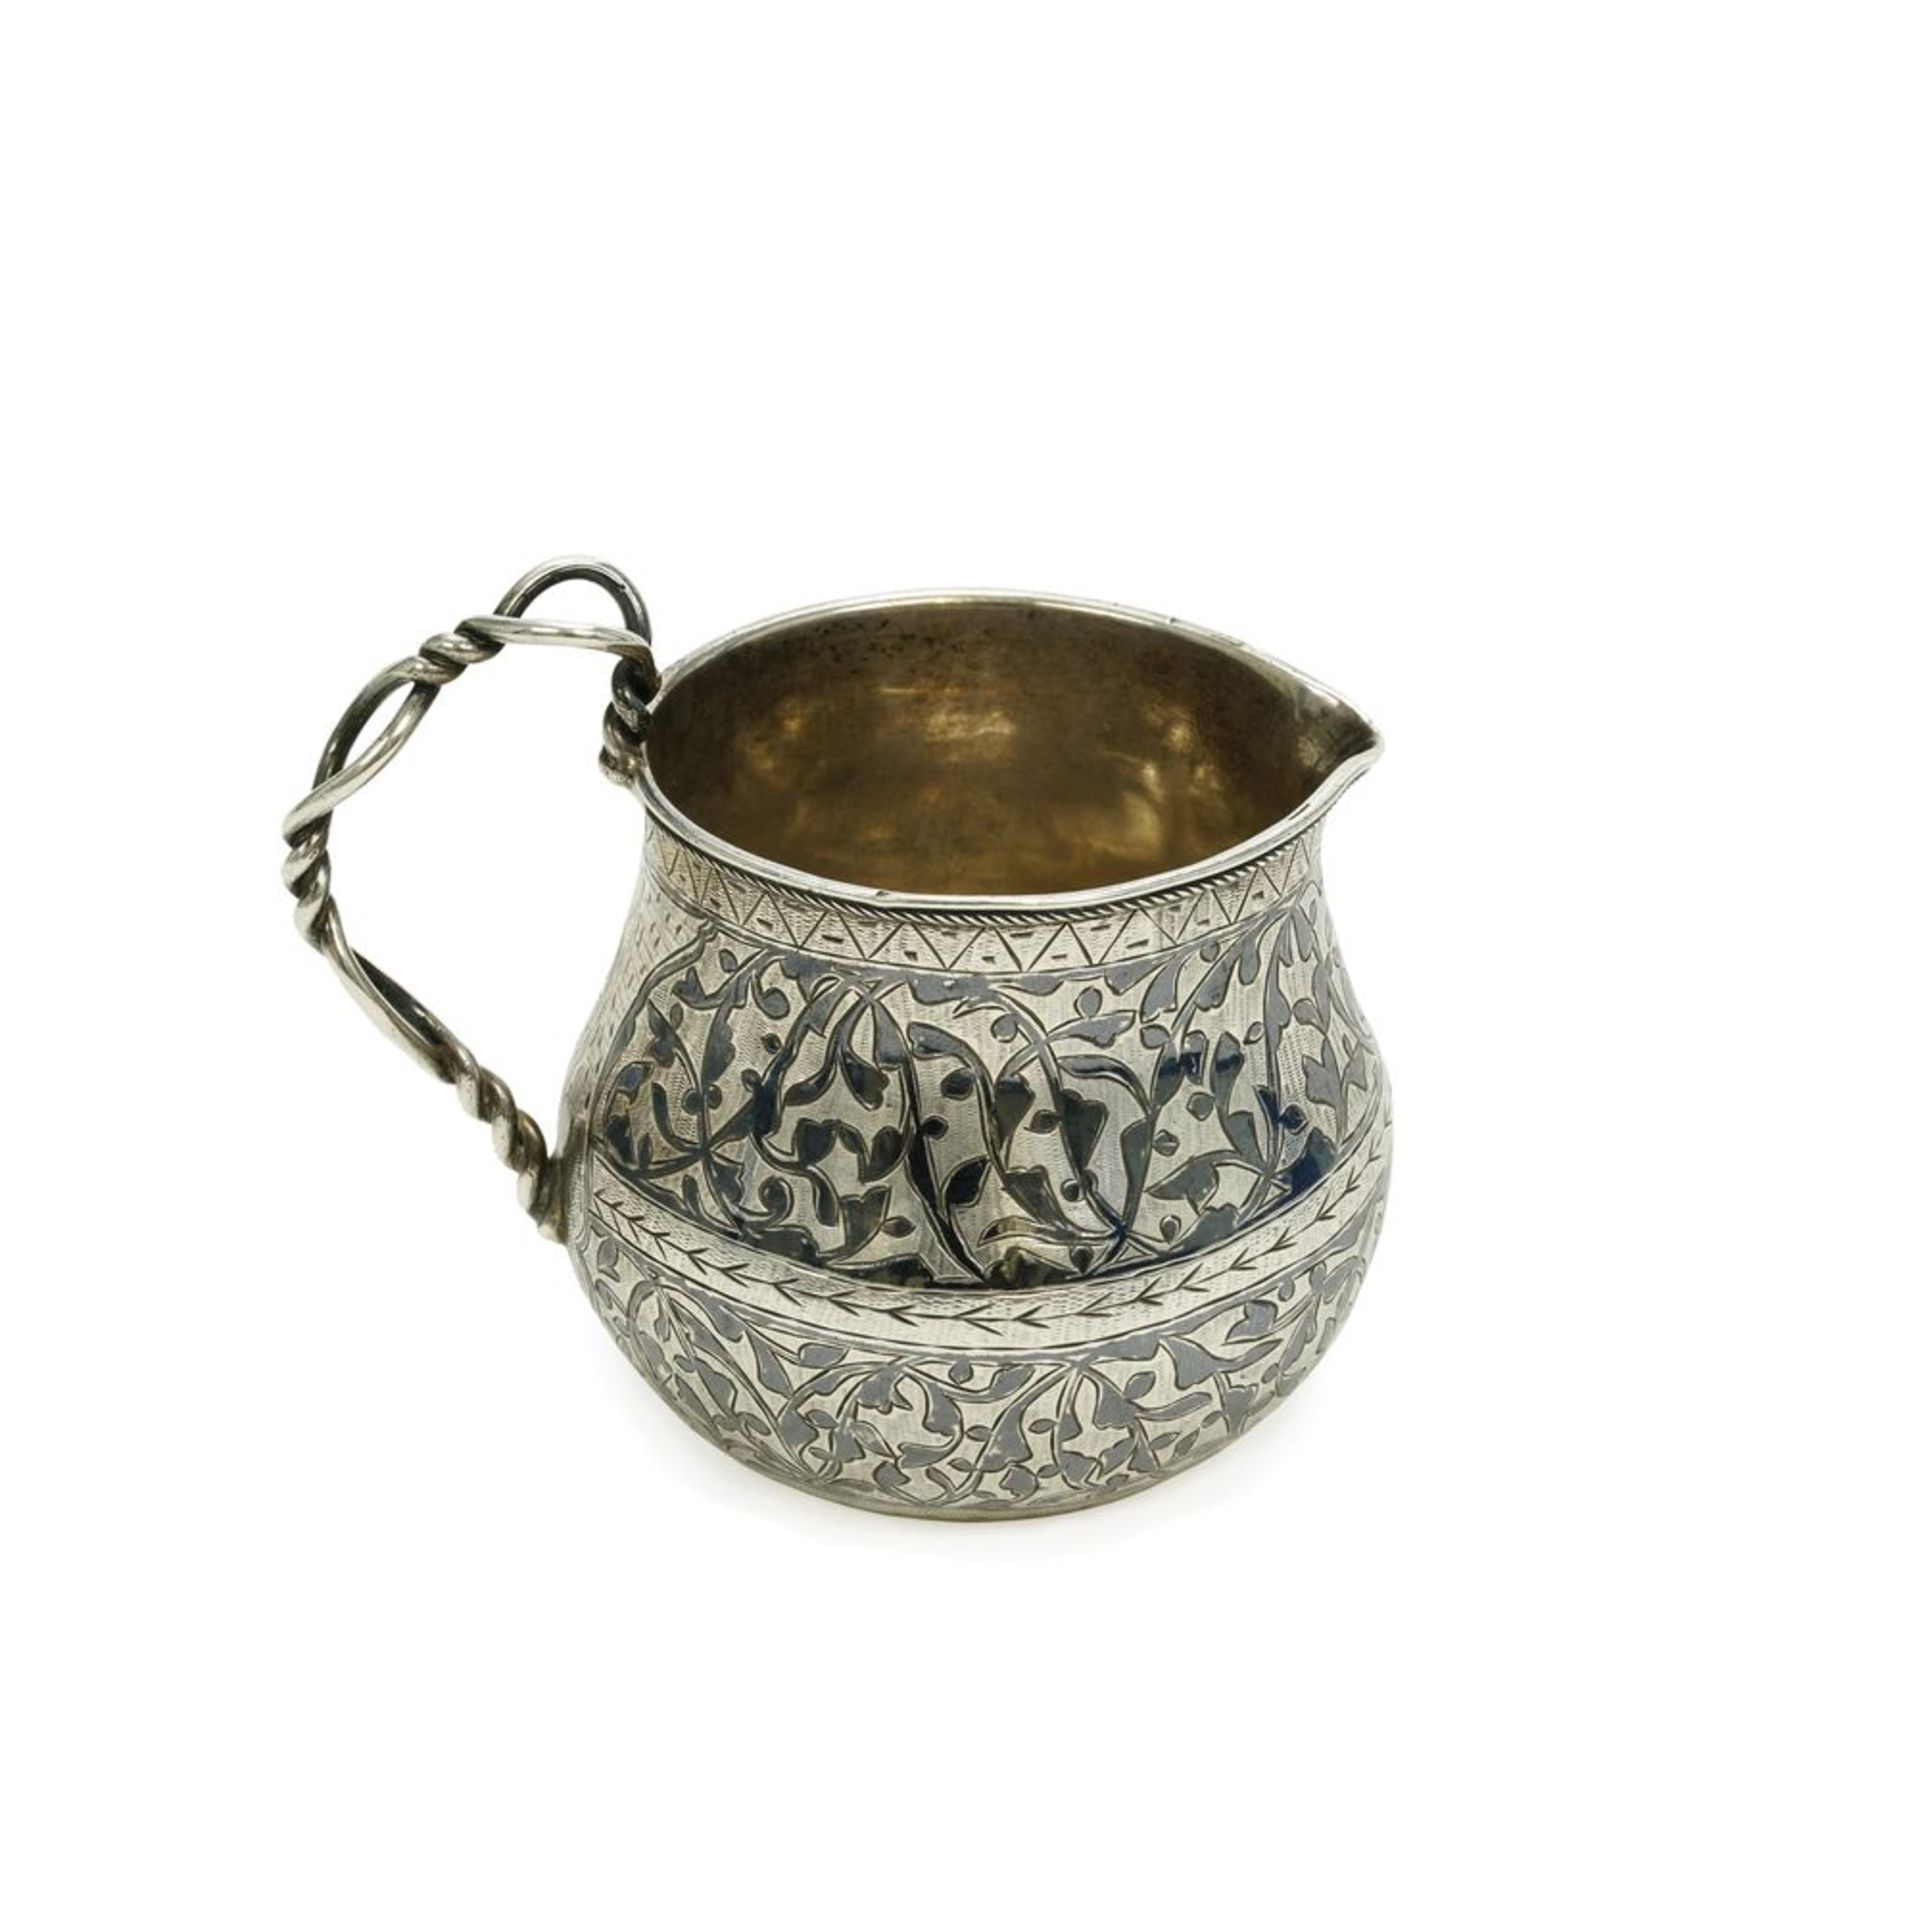 Silver creamer decorated with floral ornaments with a curled handle. Master K. G. [...]